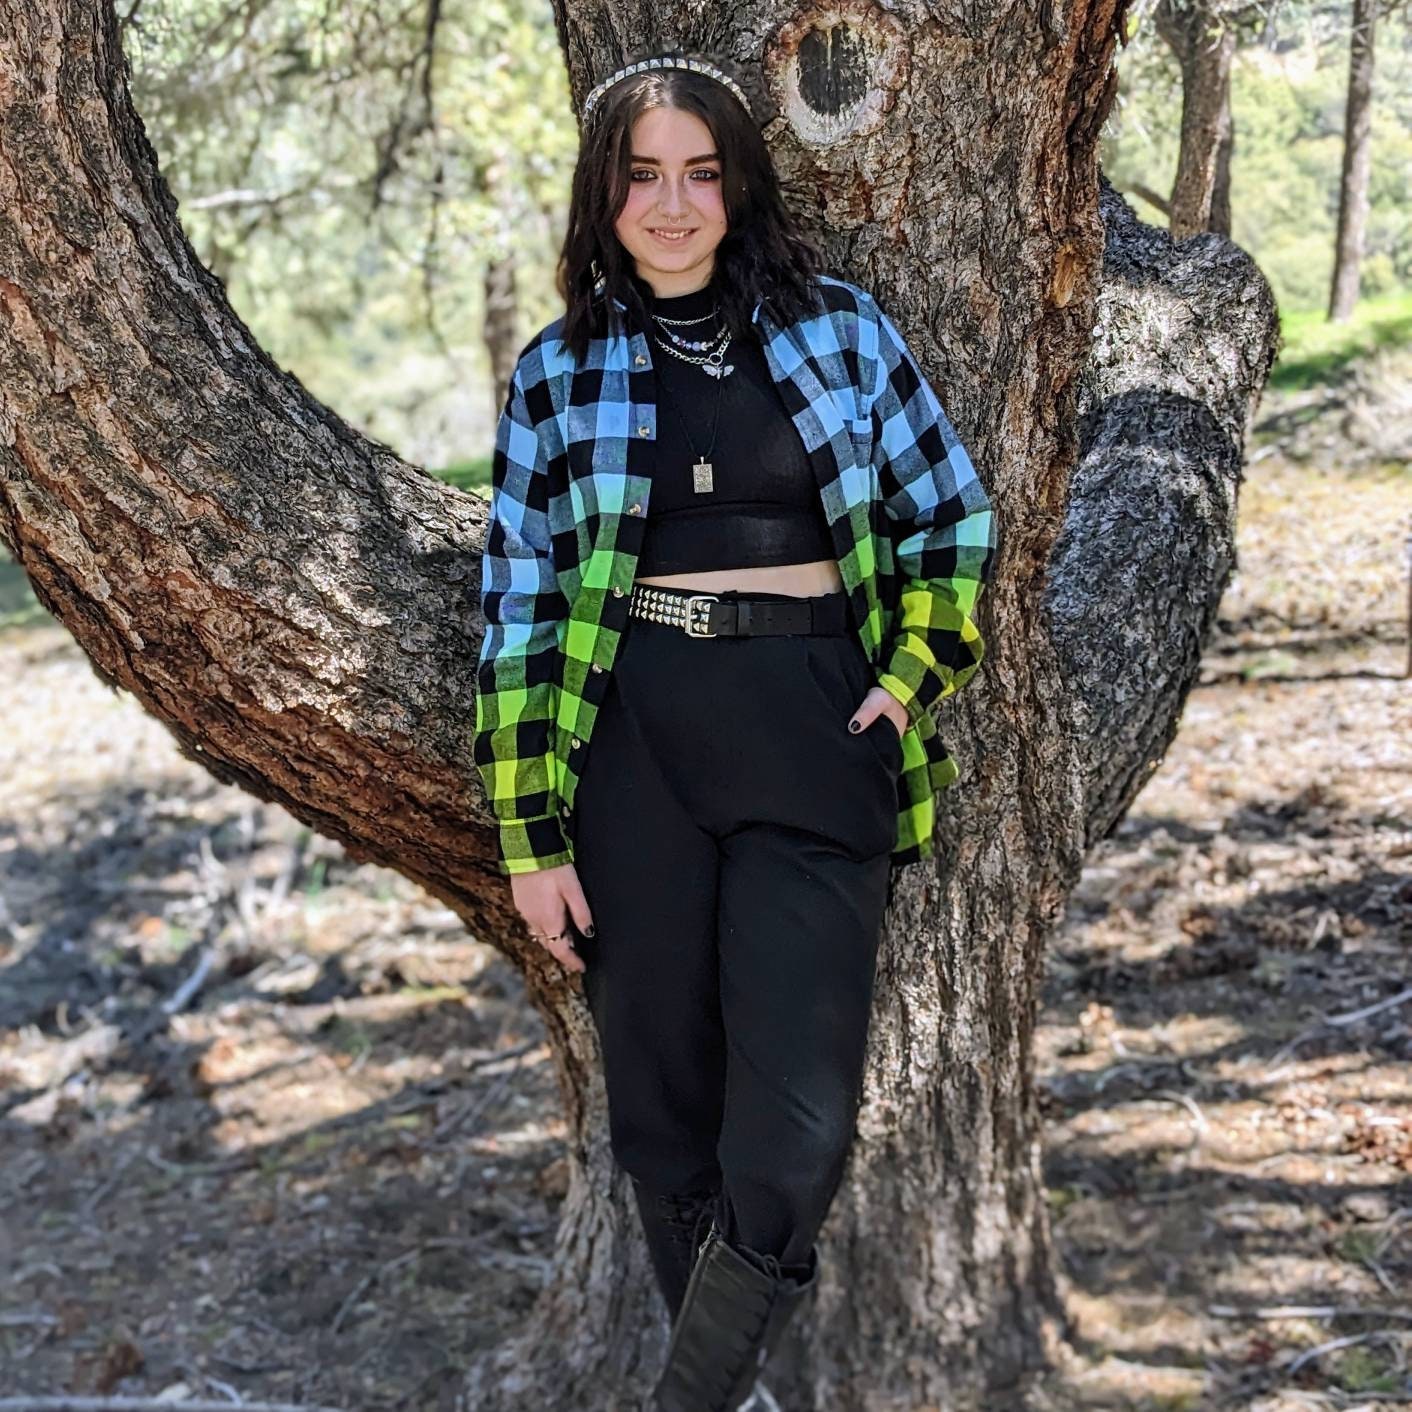 90s Oversized Neon Blue, Green, Yellow Tie Dye Plaid Flannel Shirt. Dip Dye Gradient California Hippie Surfer Flannel is Handmade with quality fiber reactive dyes for color that lasts.100% Cotton Soft Flannel Fabric, Collar Neckline,  Button Closure, Long Sleeves, front pocket, Machine washable, Unisex